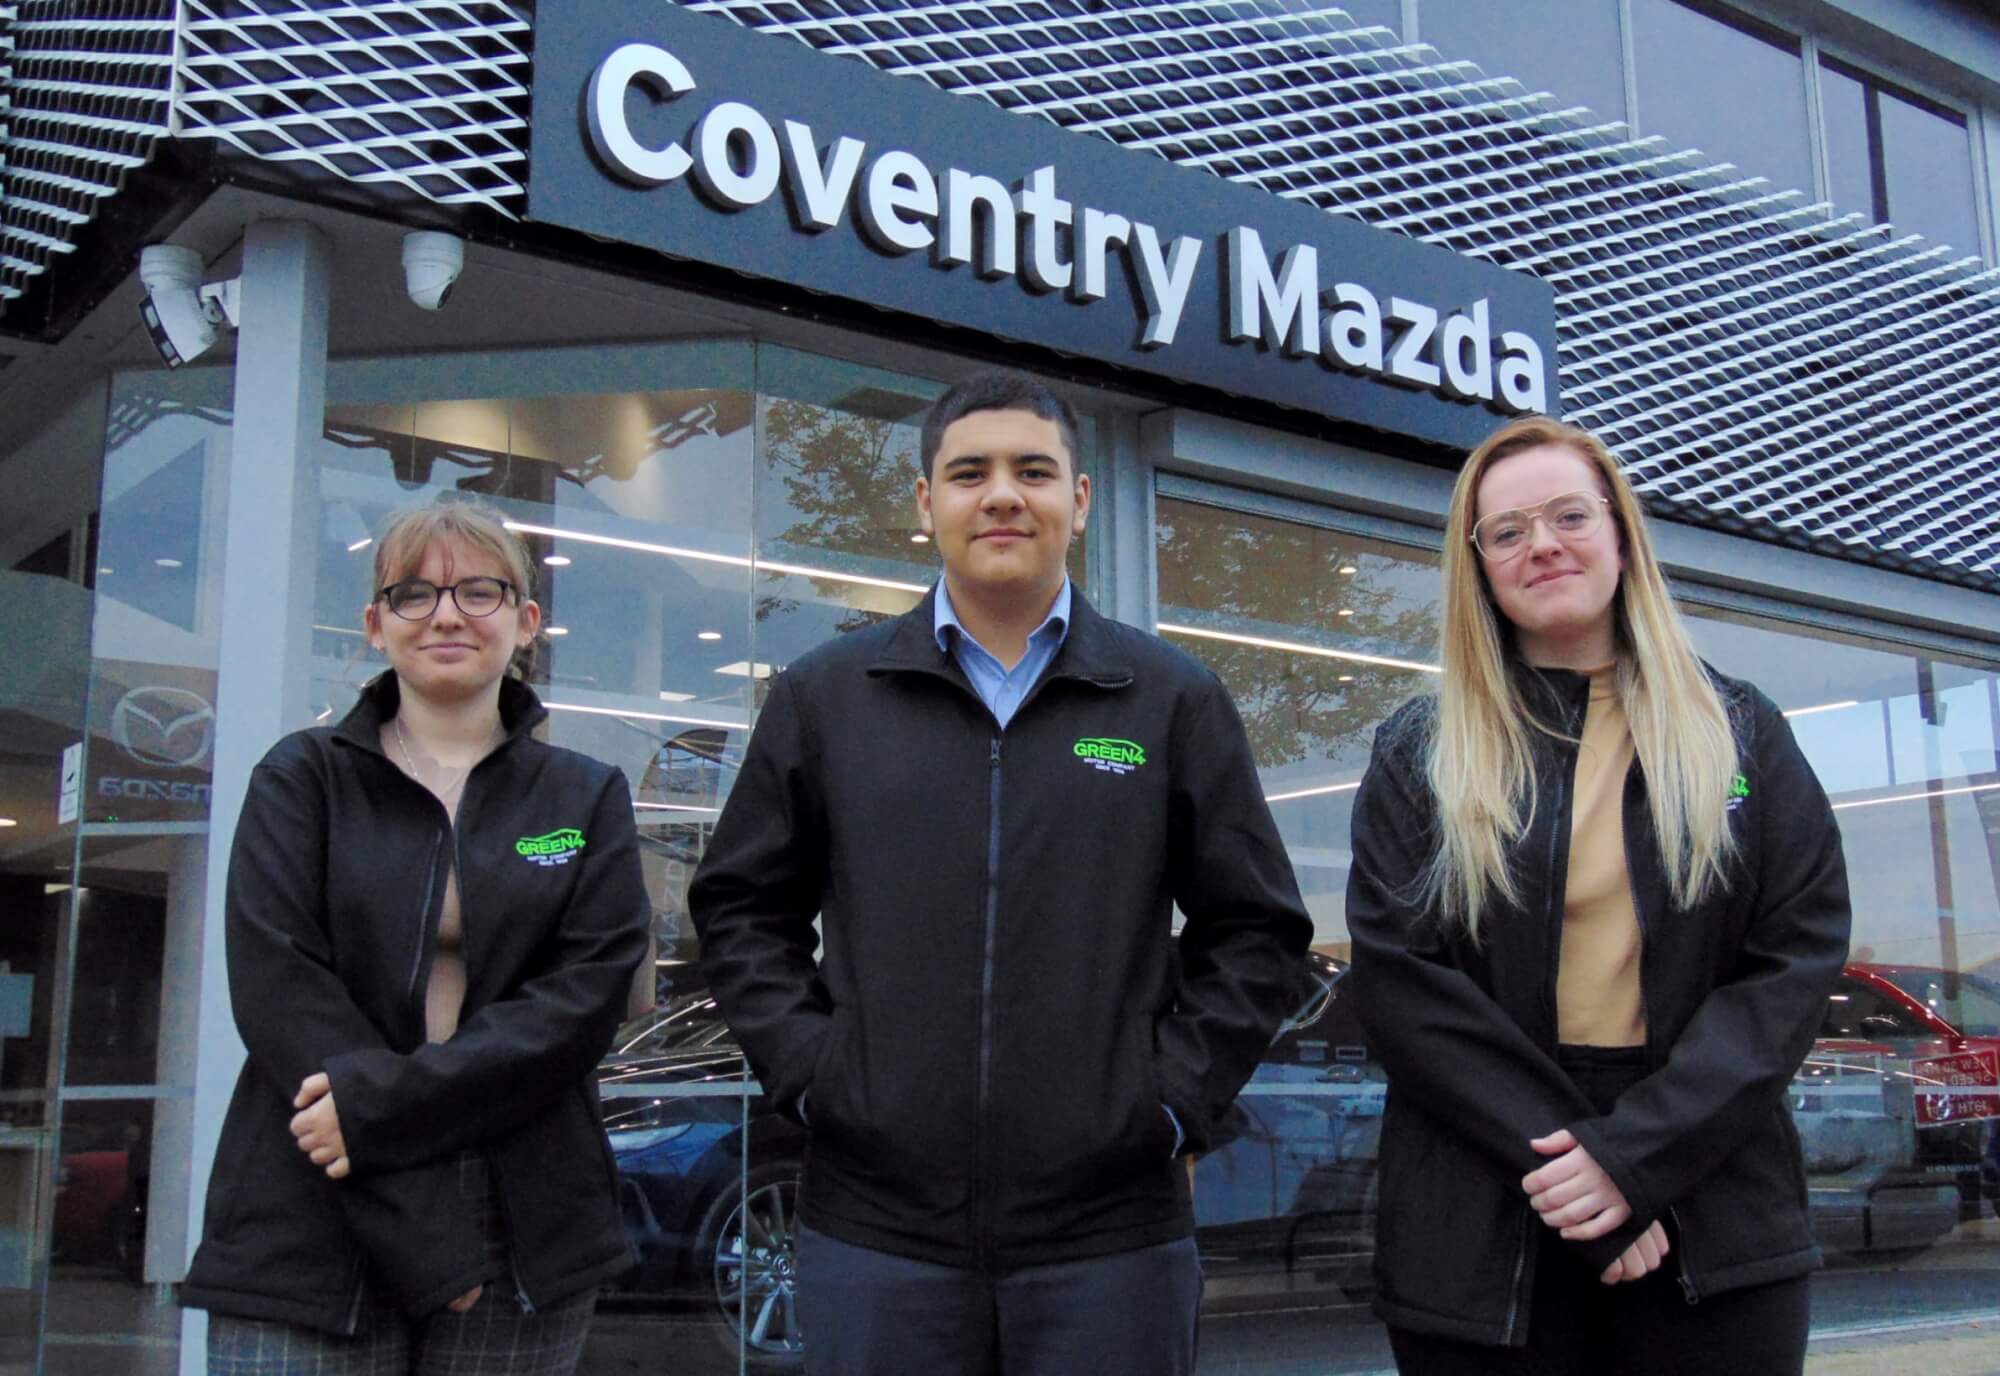 Coventry mazda employees